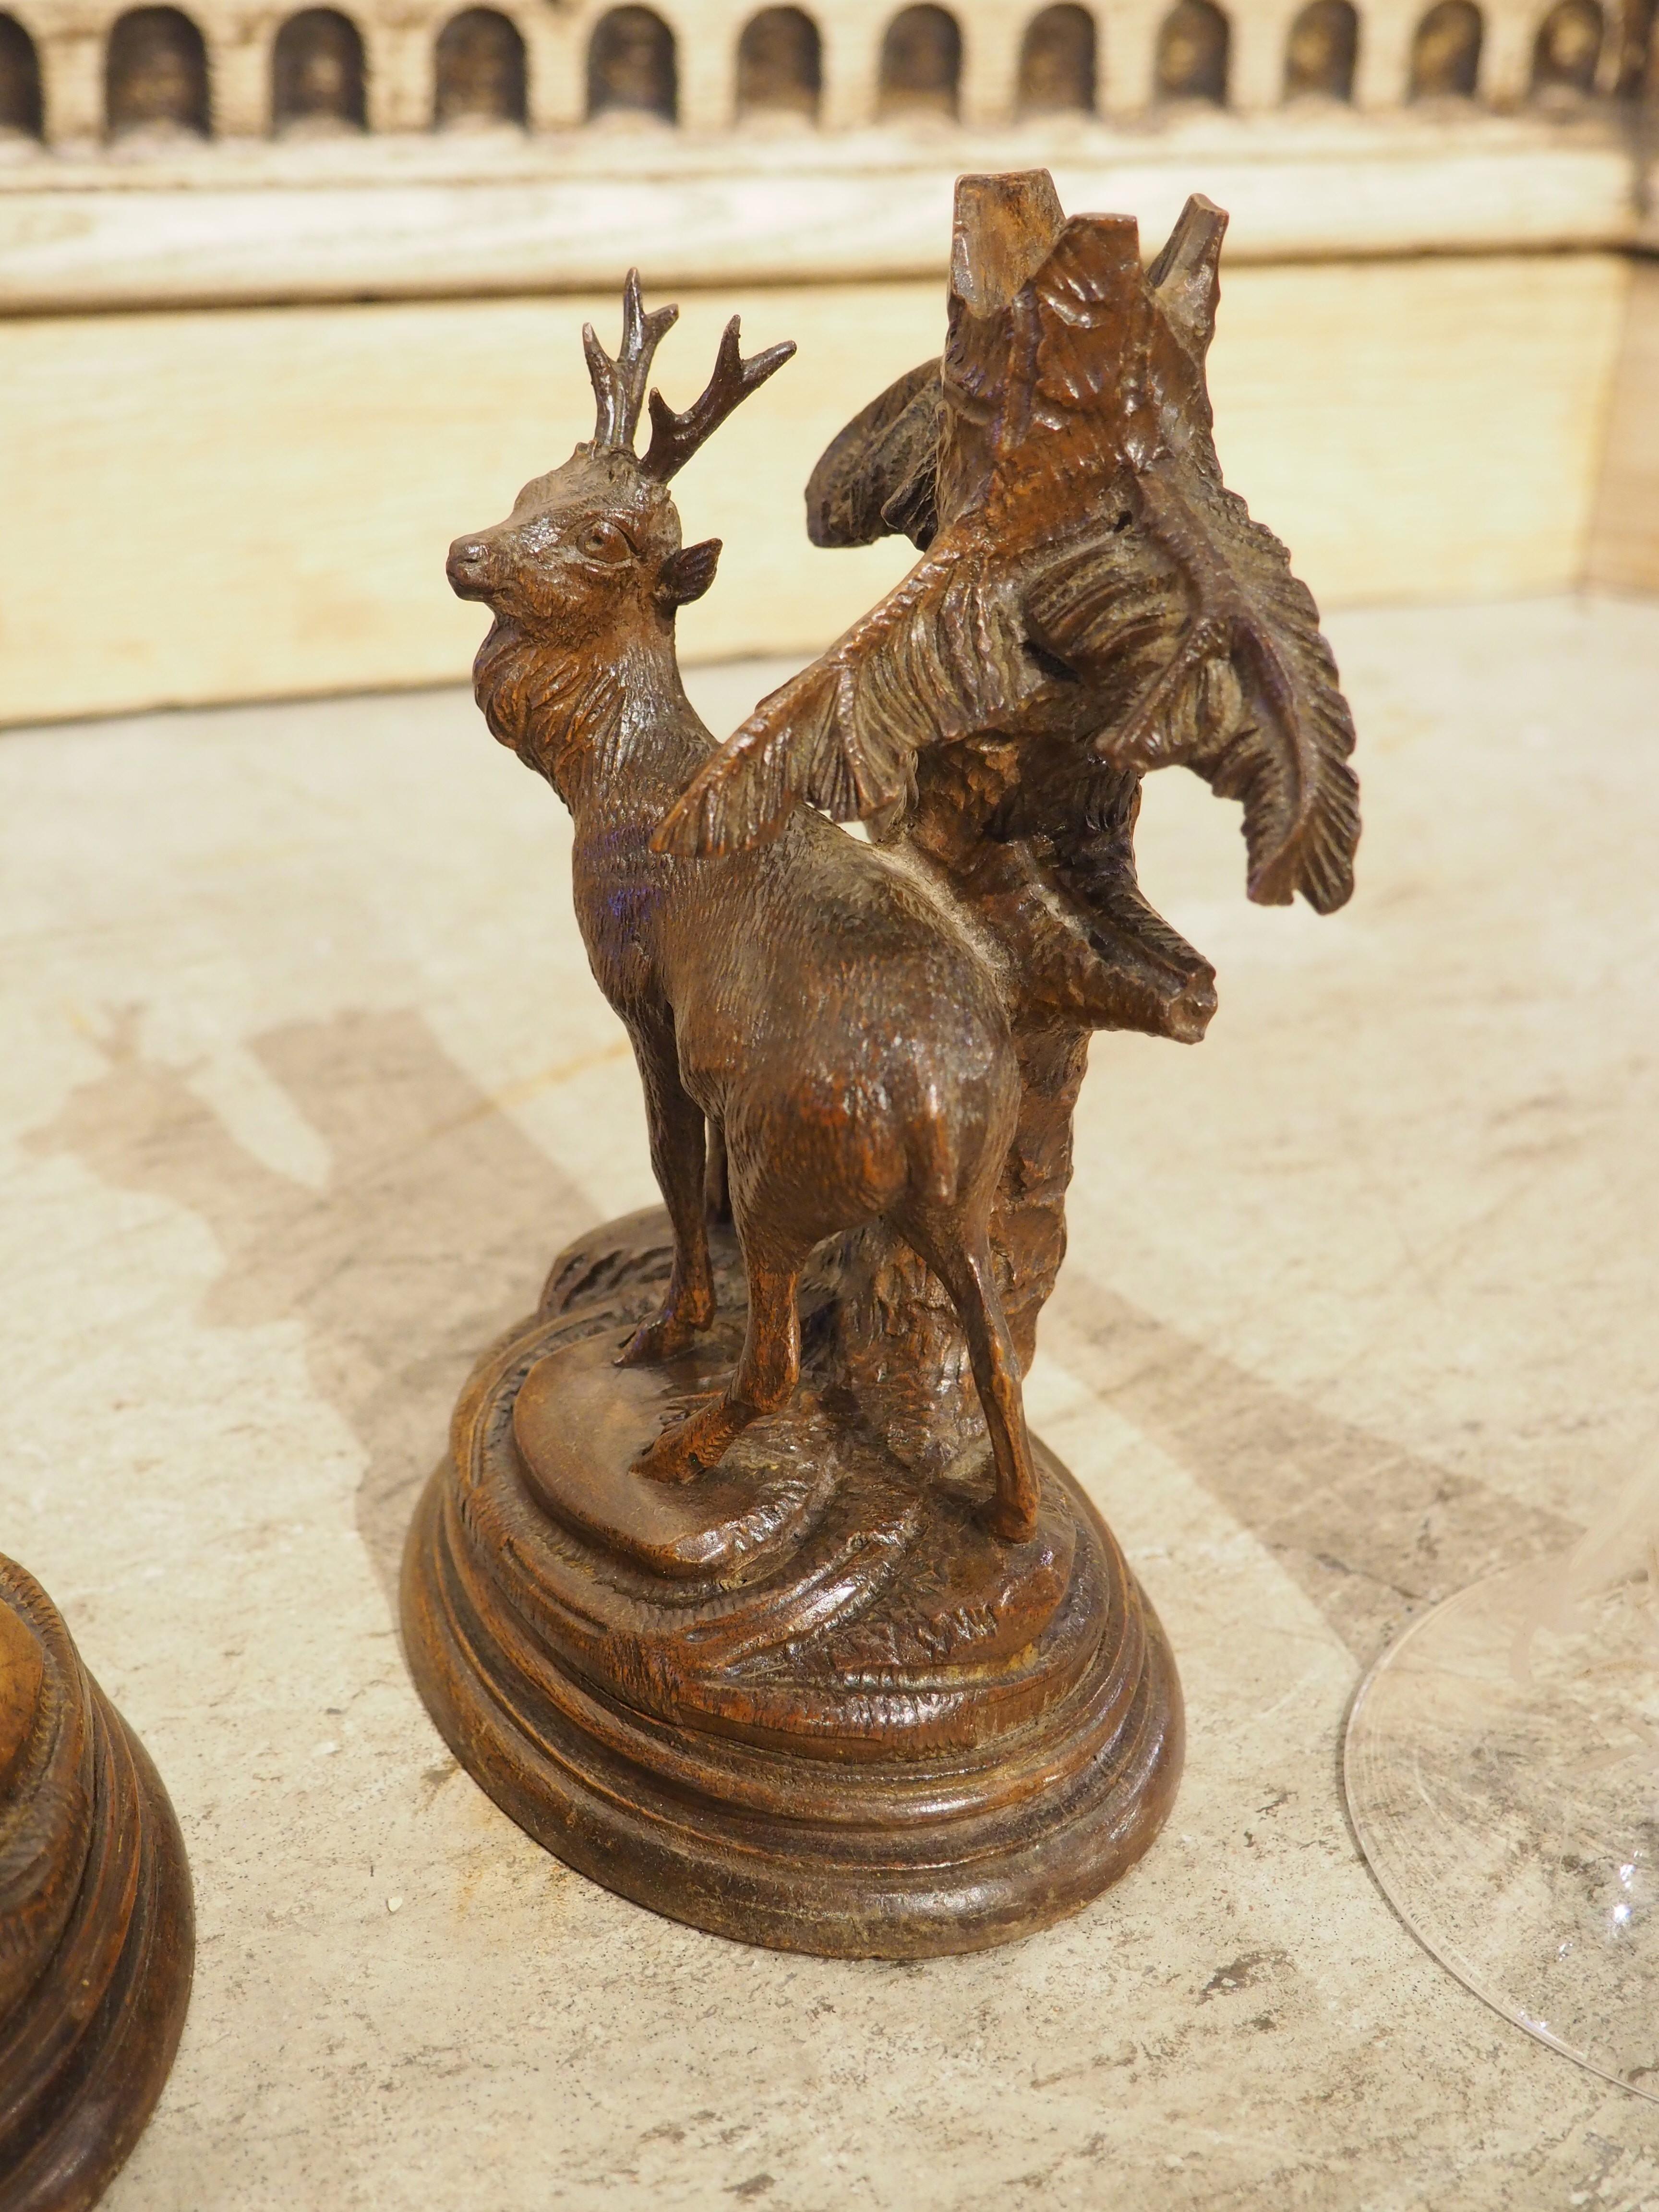 Since the early 1800’s, the term “Black Forest” has been used to describe elaborate wood carvings, often showcasing animals in a realistic manner. The name was derived from the eponymous area of Germany, where the style was thought to have